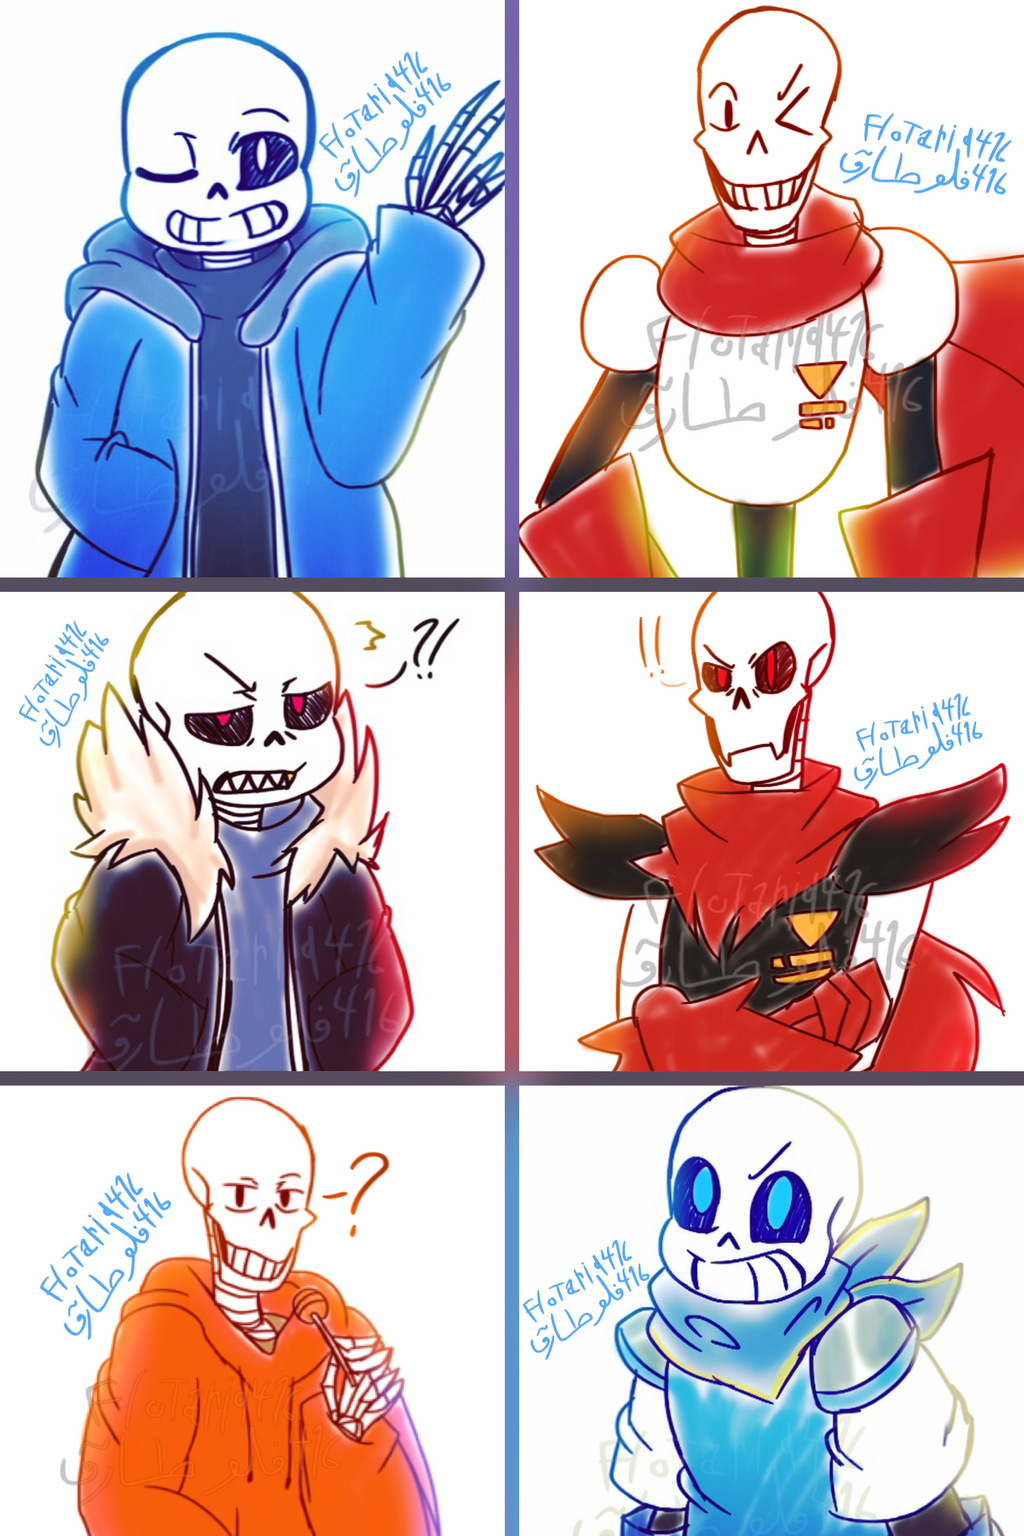 Ut, Uf, Us, Sans and Papyrus by Yurafo on DeviantArt